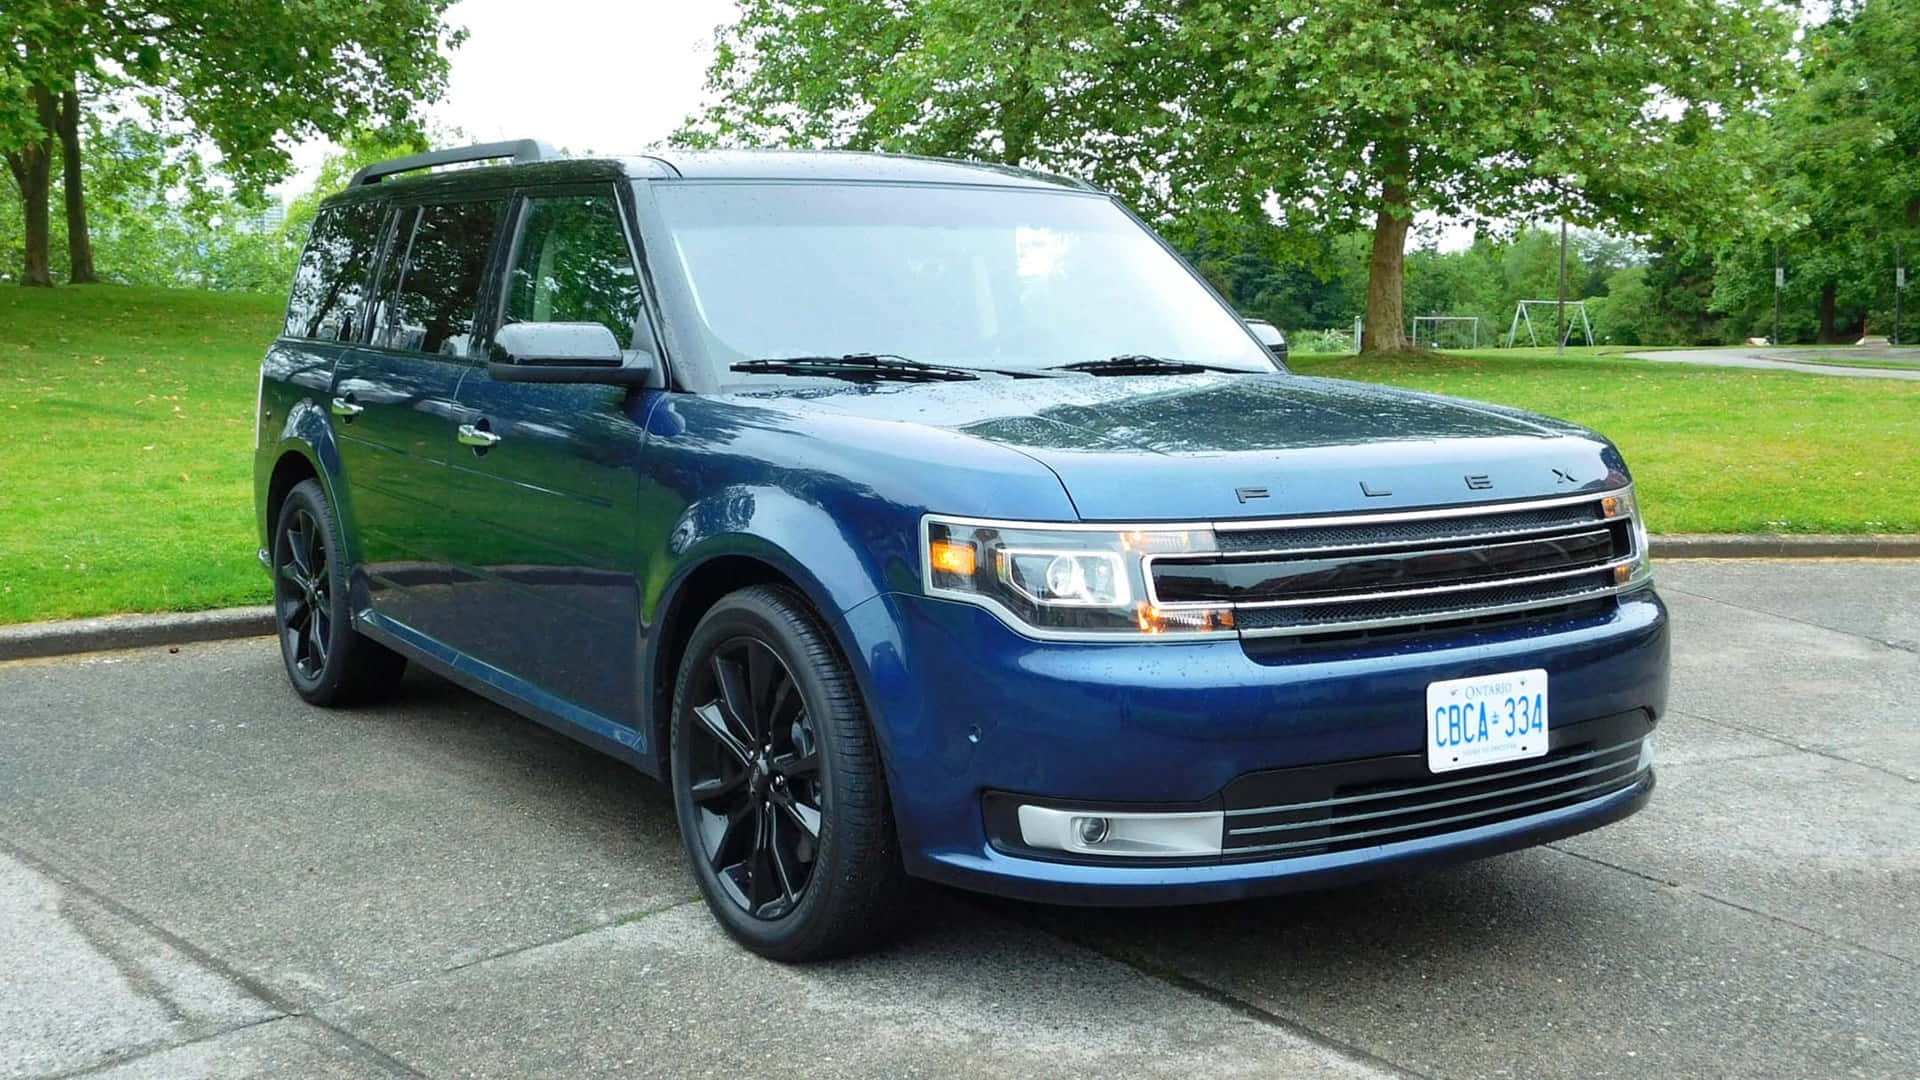 Sleek and Stylish Ford Flex cruising on the open road Wallpaper